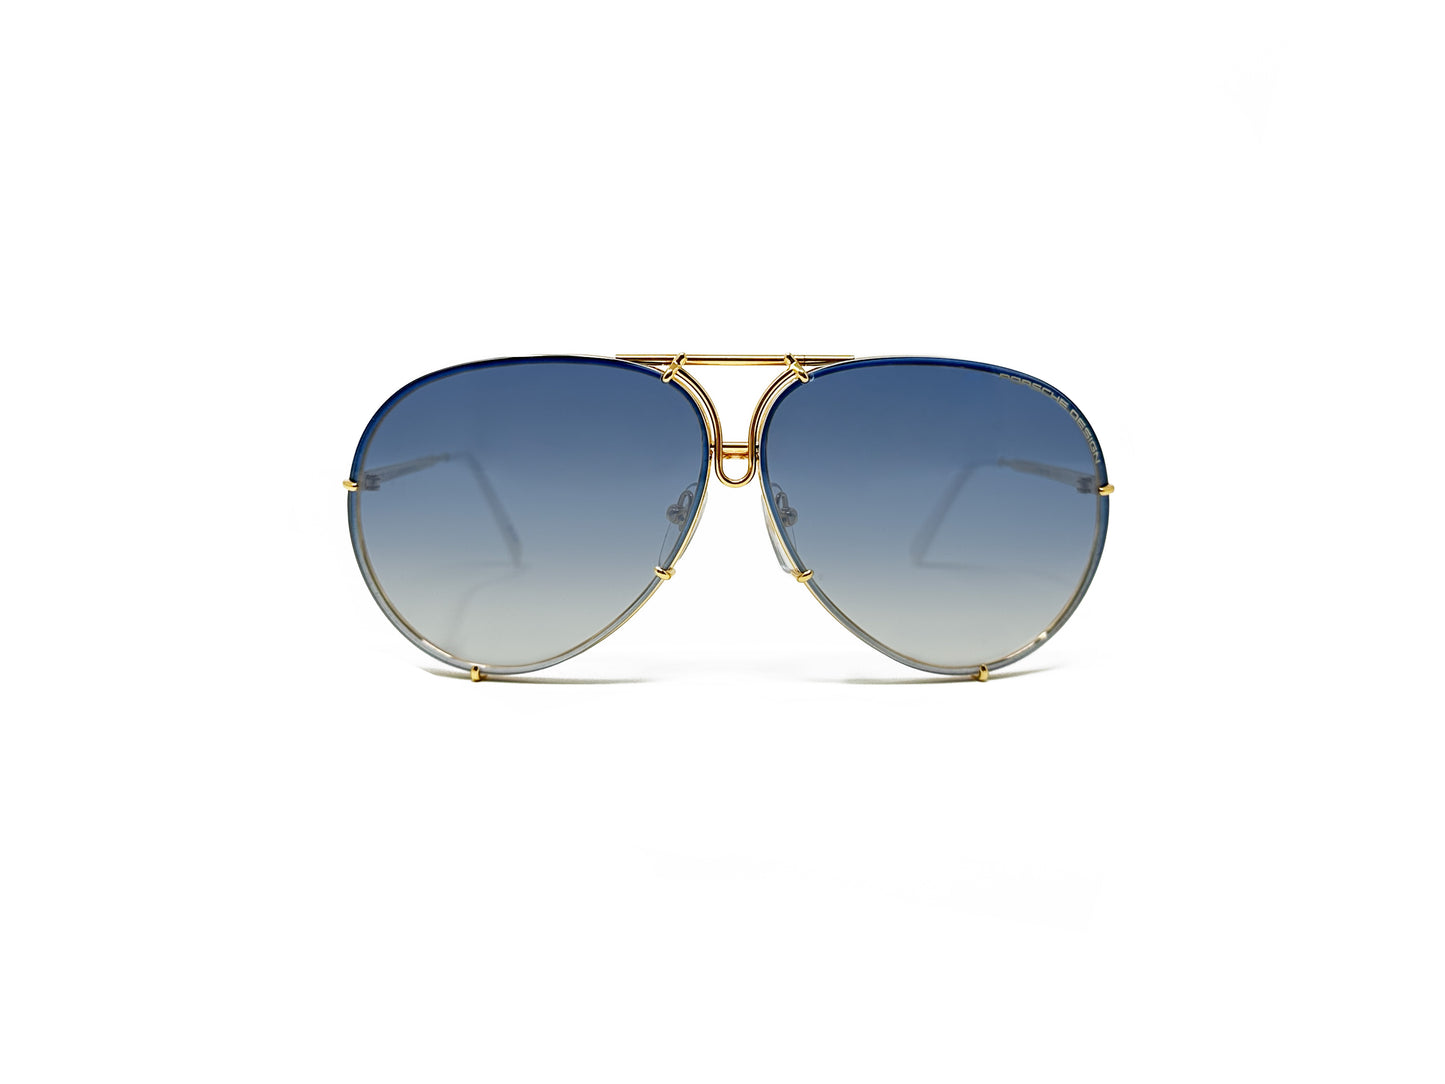 Porsche Design aviator style sunglass. Model: P8478. Color W - Gold with White temples and blue gradient lens. Front view.